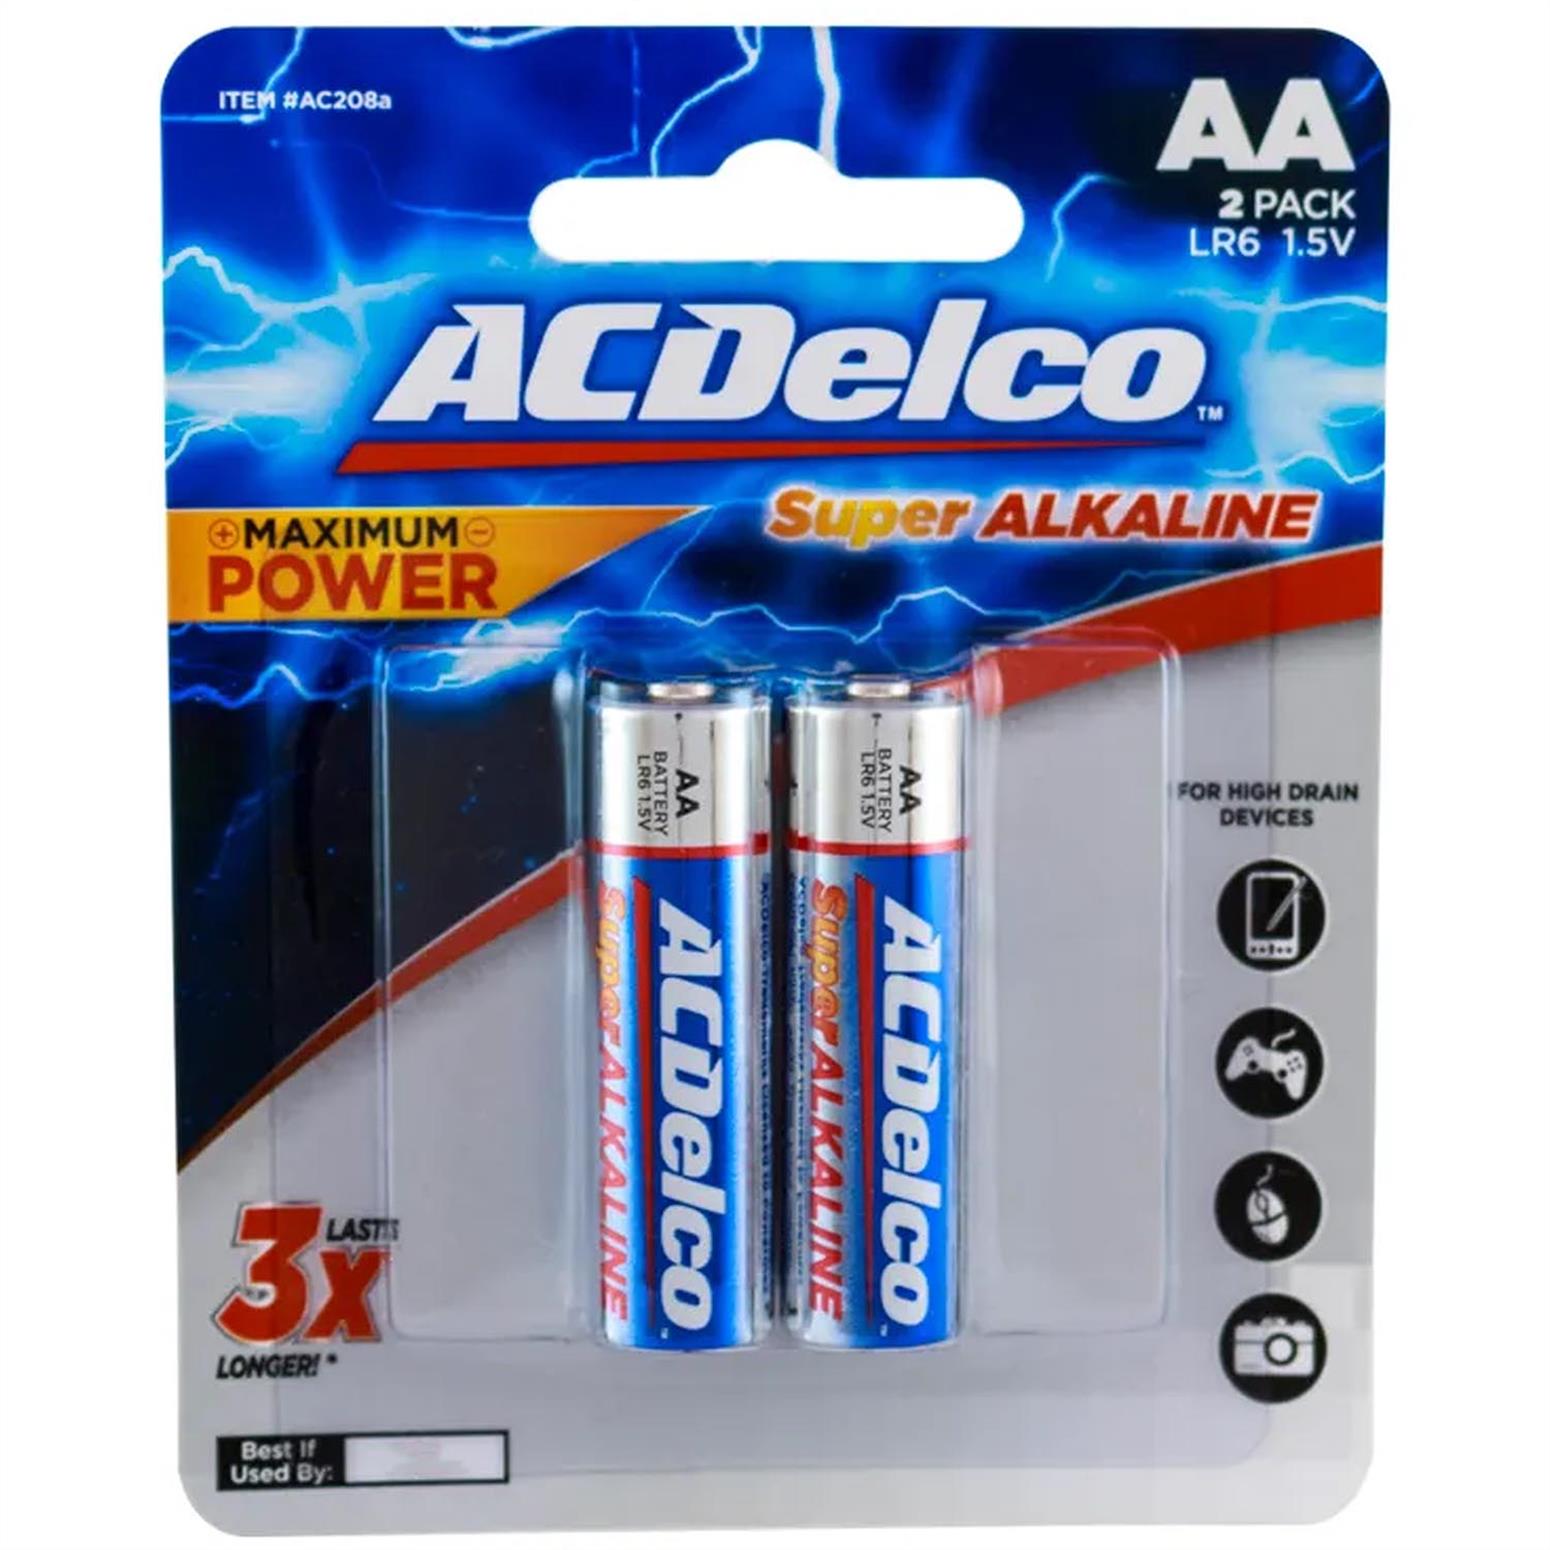 ACDelco Alkaline AA Battery Pack of 2 Pieces